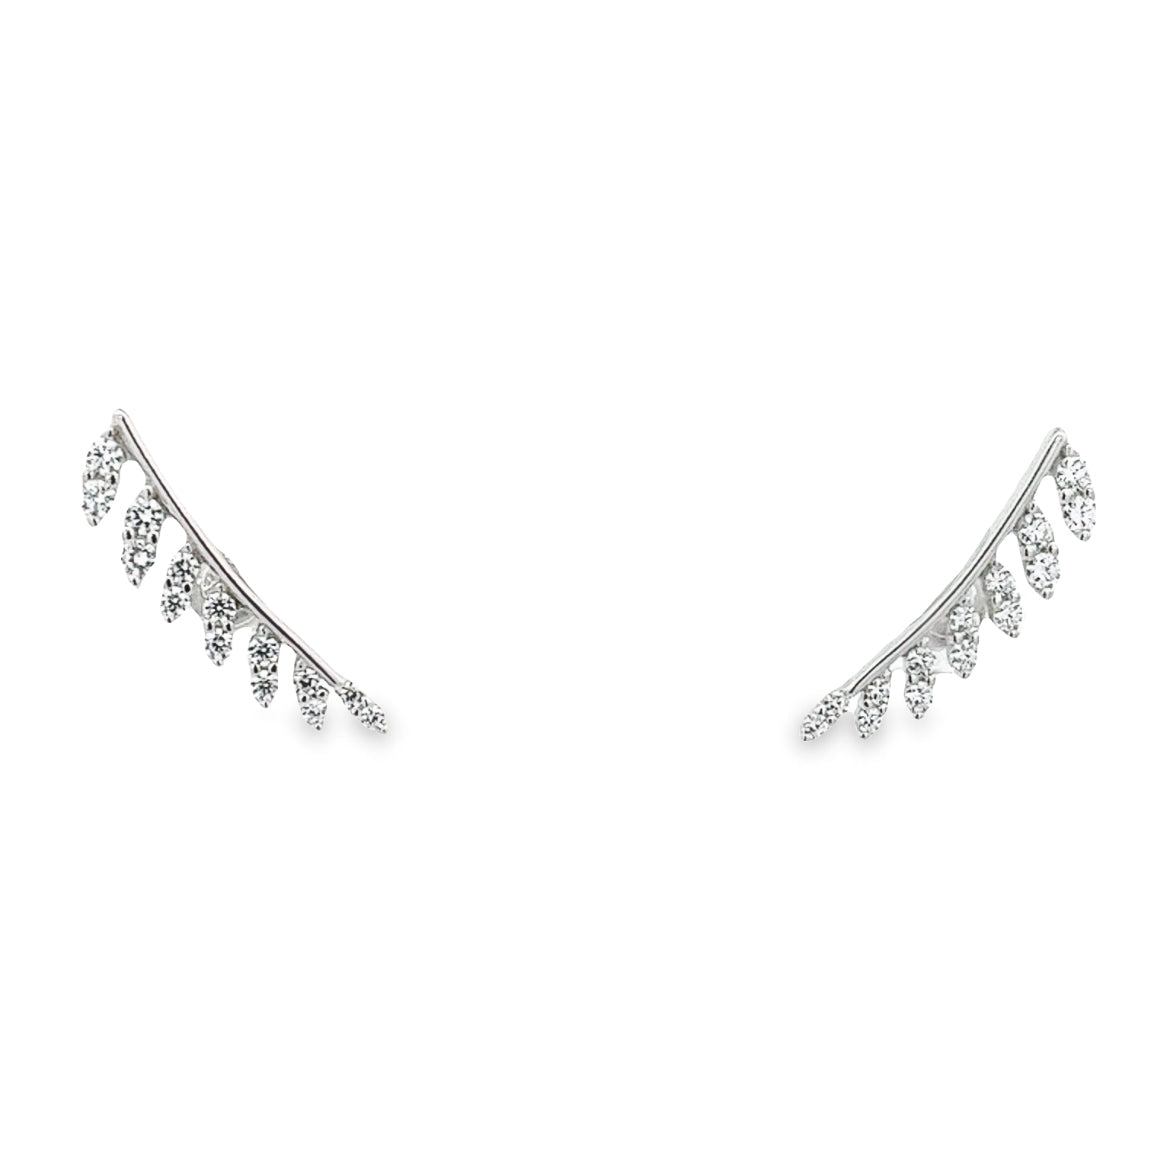 925 SILVER PLATED LEAF EARRINGS WITH CRYSTALS